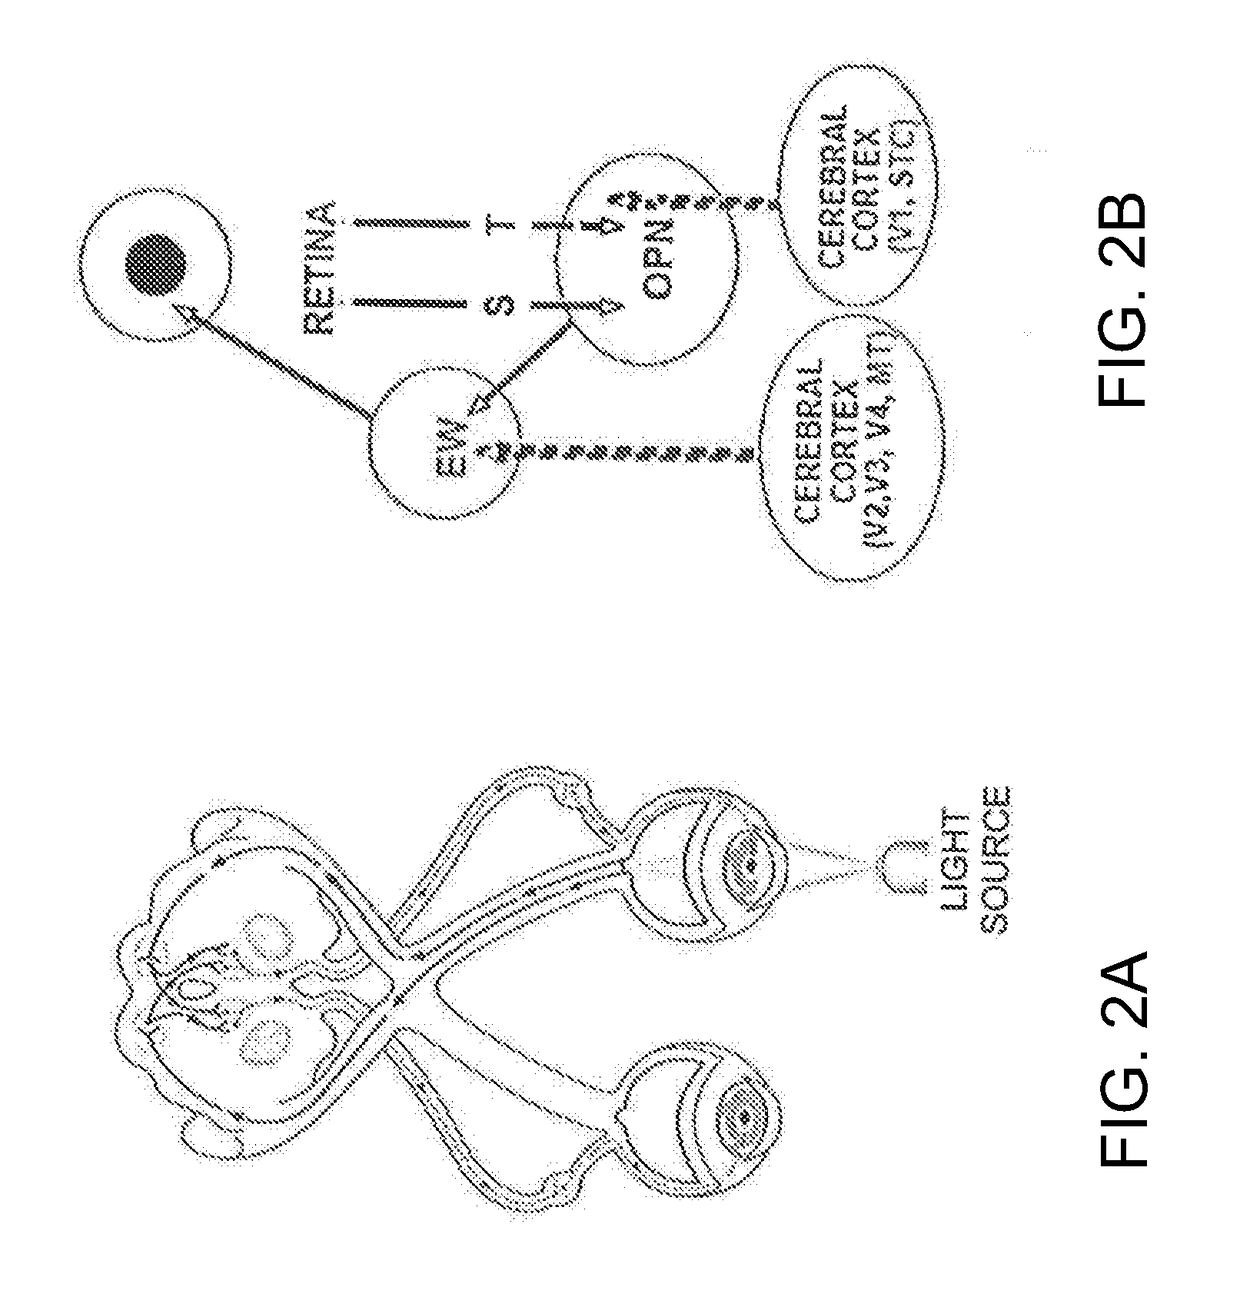 Method and system for pupillometric assessment of toxin exposure